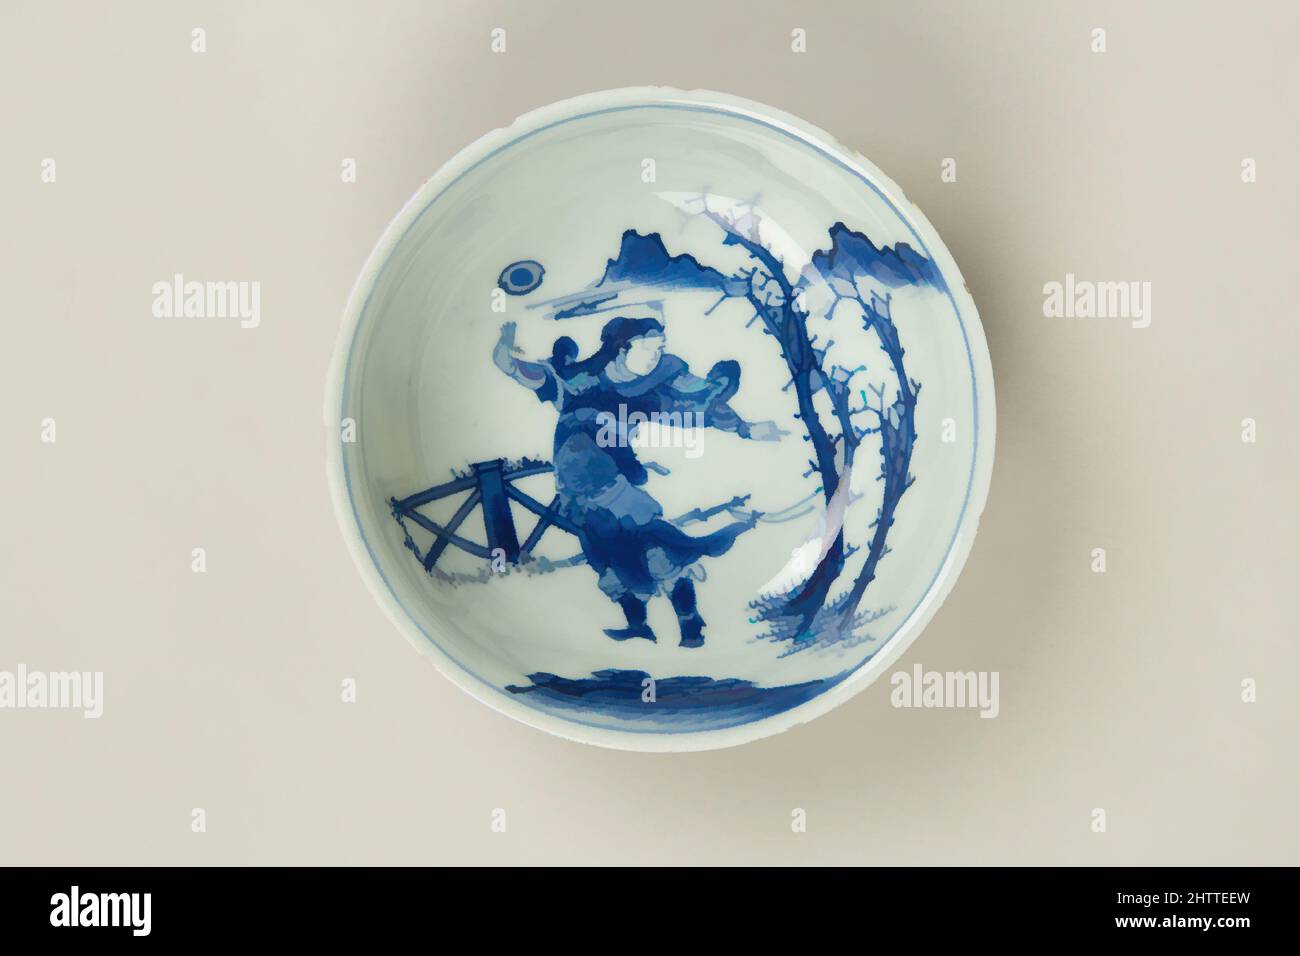 Art inspired by Bowl, Qing dynasty (1644–1911), later Transitional period, ca. 1662–83, China, Porcelain with carved decoration, painted in underglaze blue, H. 1 5/8 in. (4.1 cm); Diam. 4 7/8 in. (12.4 cm); Diam. of foot 2 1/8 in. (5.4 cm), Ceramics, Classic works modernized by Artotop with a splash of modernity. Shapes, color and value, eye-catching visual impact on art. Emotions through freedom of artworks in a contemporary way. A timeless message pursuing a wildly creative new direction. Artists turning to the digital medium and creating the Artotop NFT Stock Photo